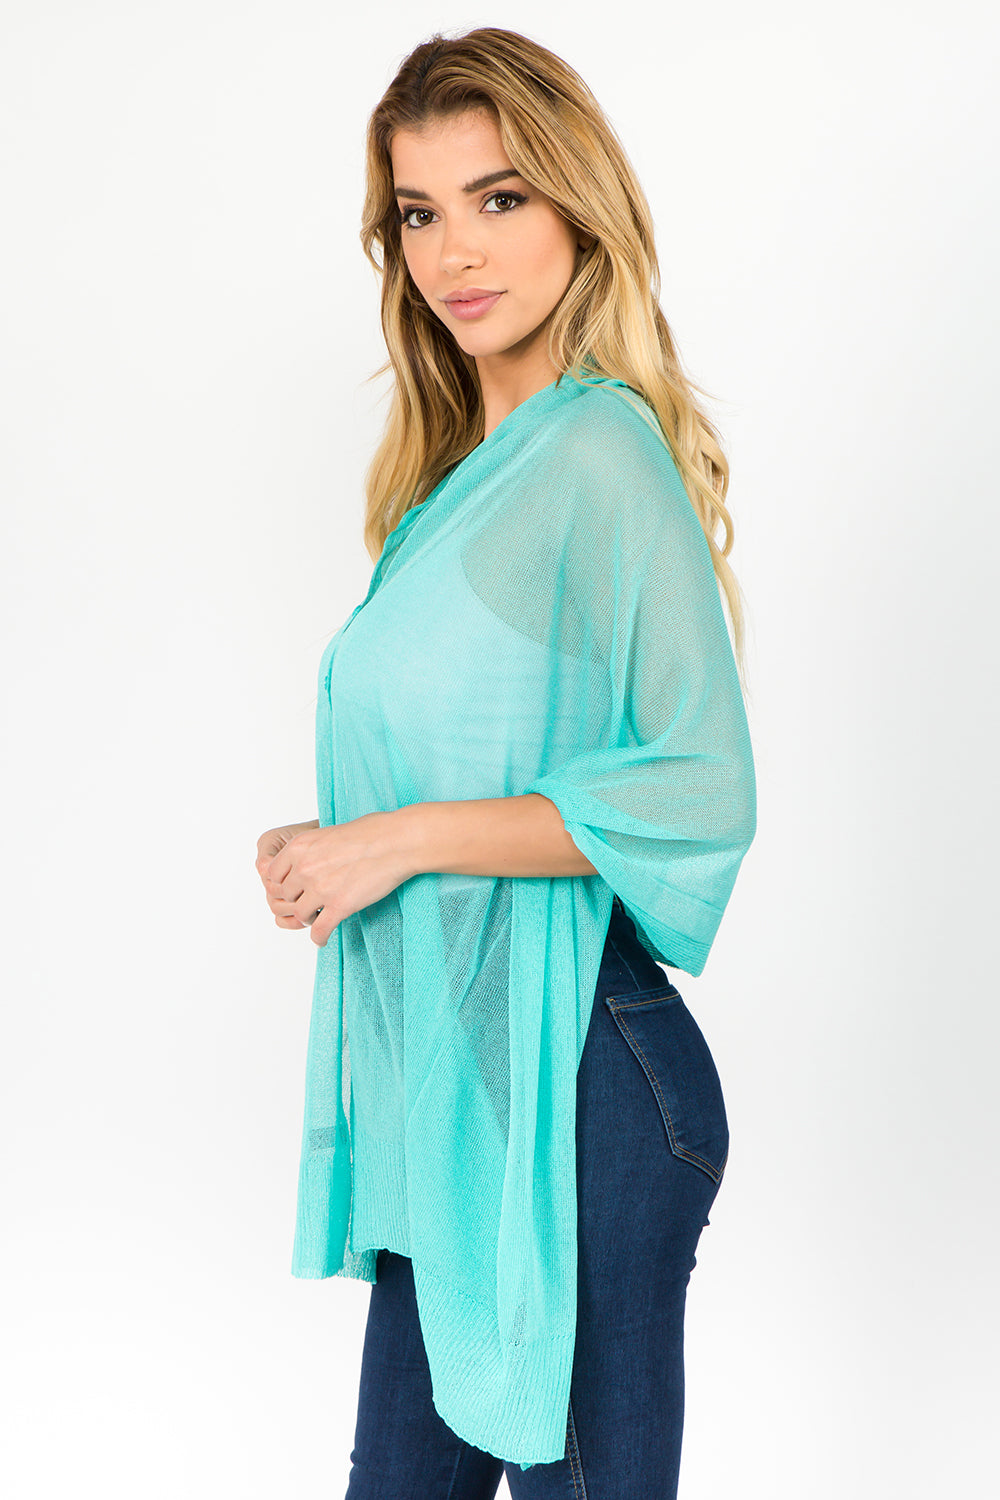 SV-8631 sheer shawl with buttons